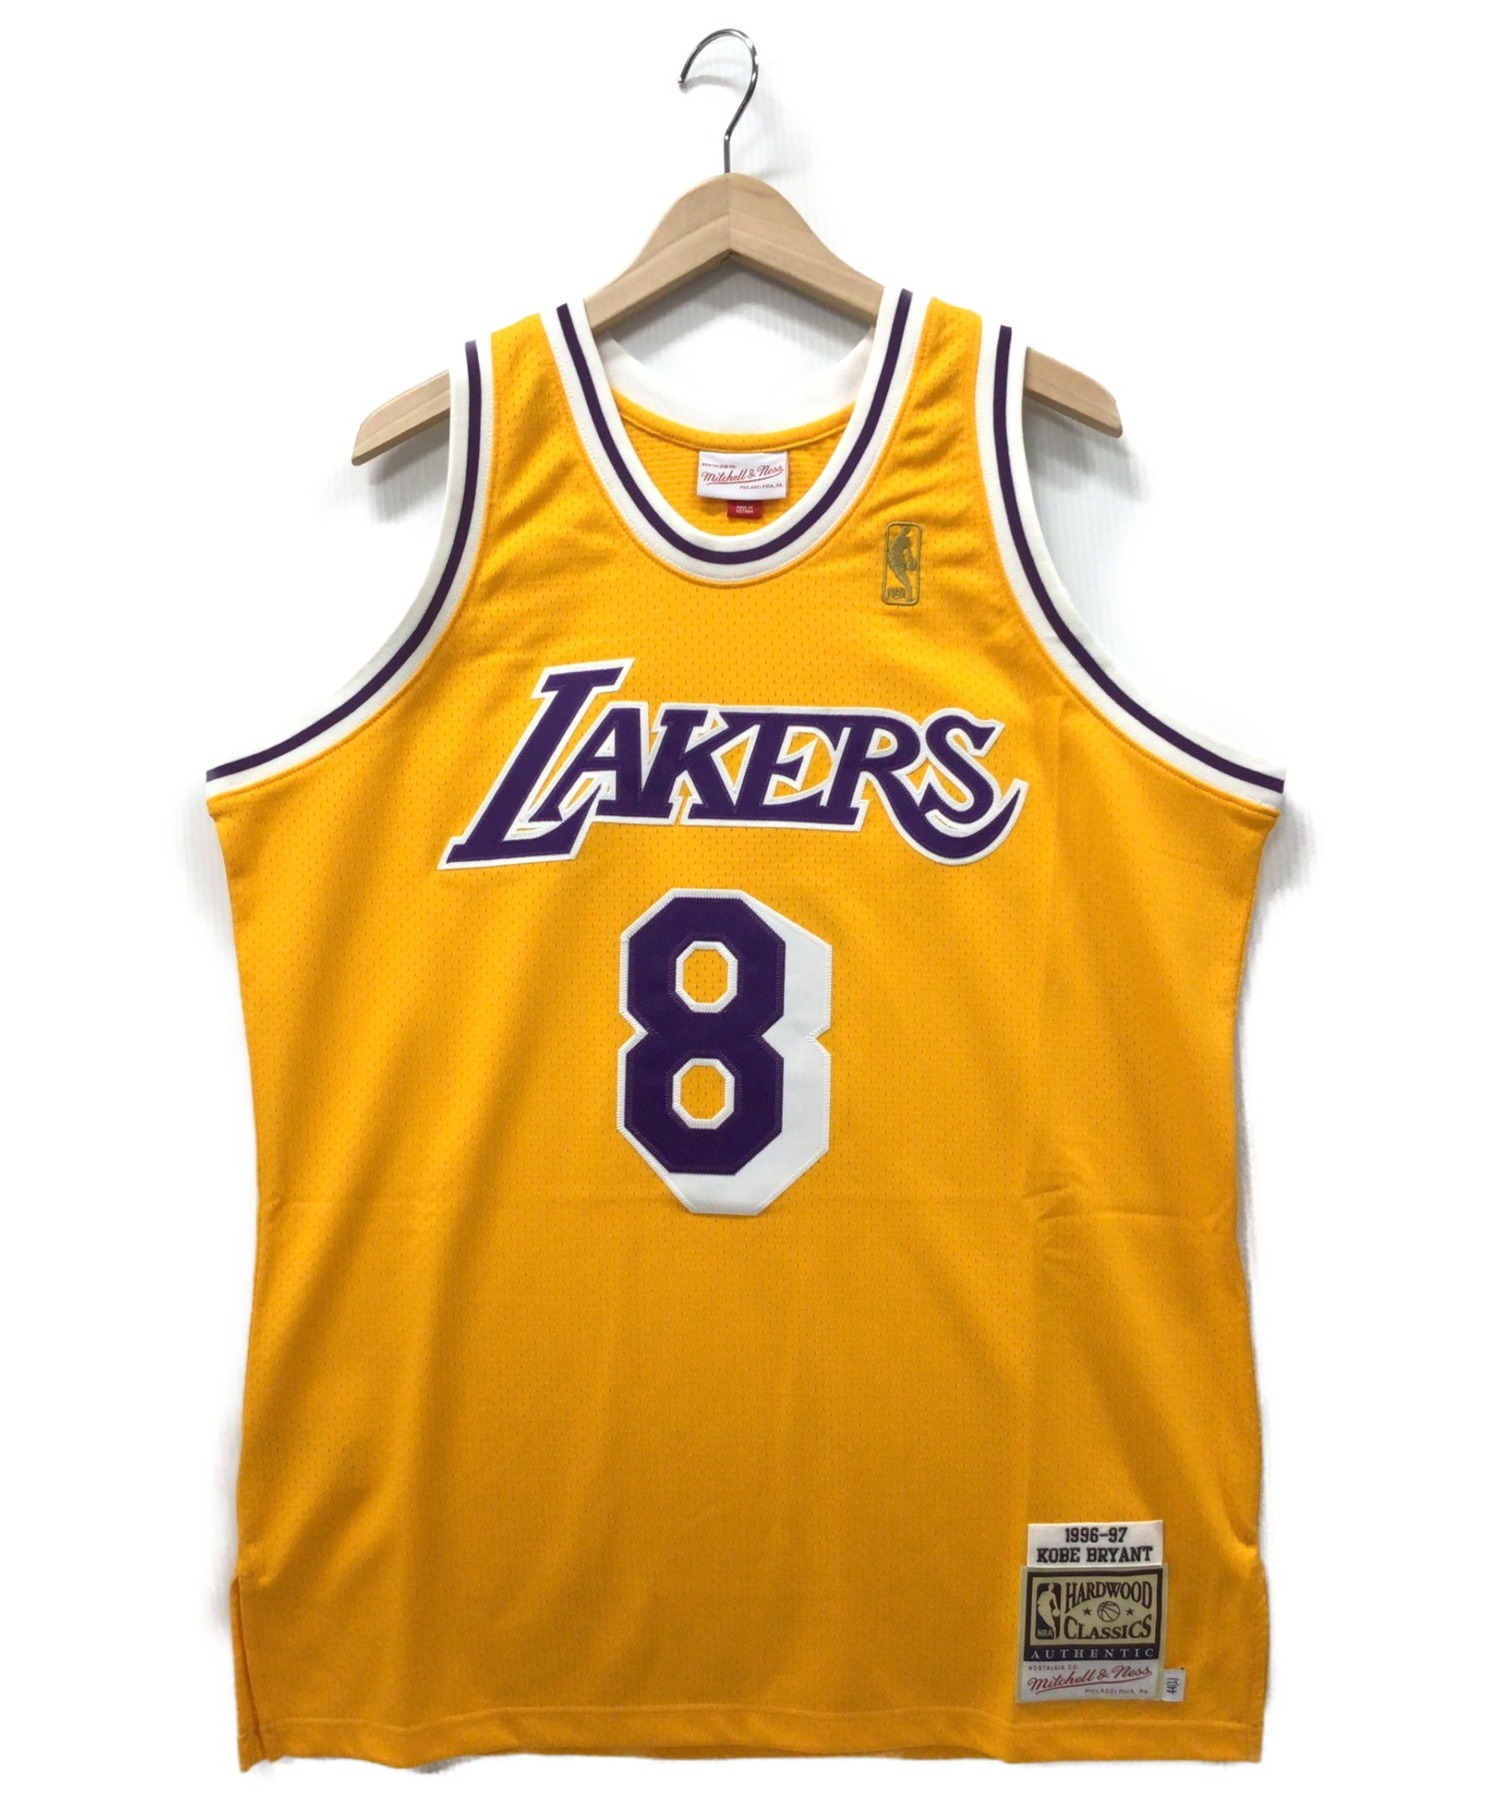 MITCHELL & NESS (ミッチェルアンドネス) LOS ANGELES LAKERS NBA AUTHENTIC HOME JERSEY  イエロー サイズ:L